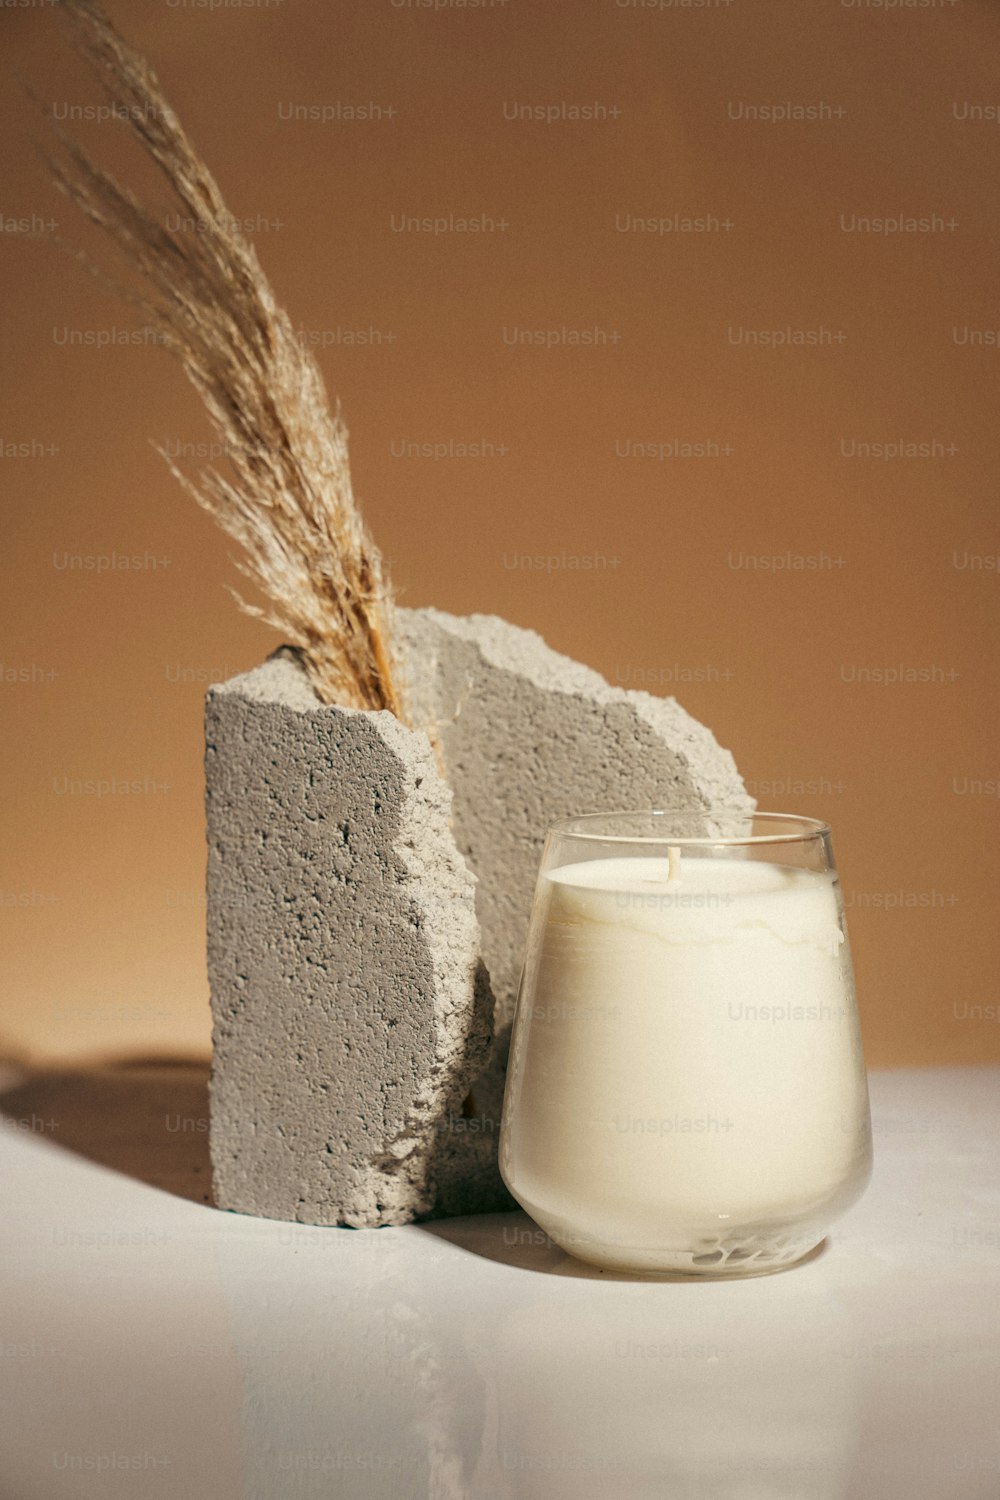 a glass of milk next to a block of cement